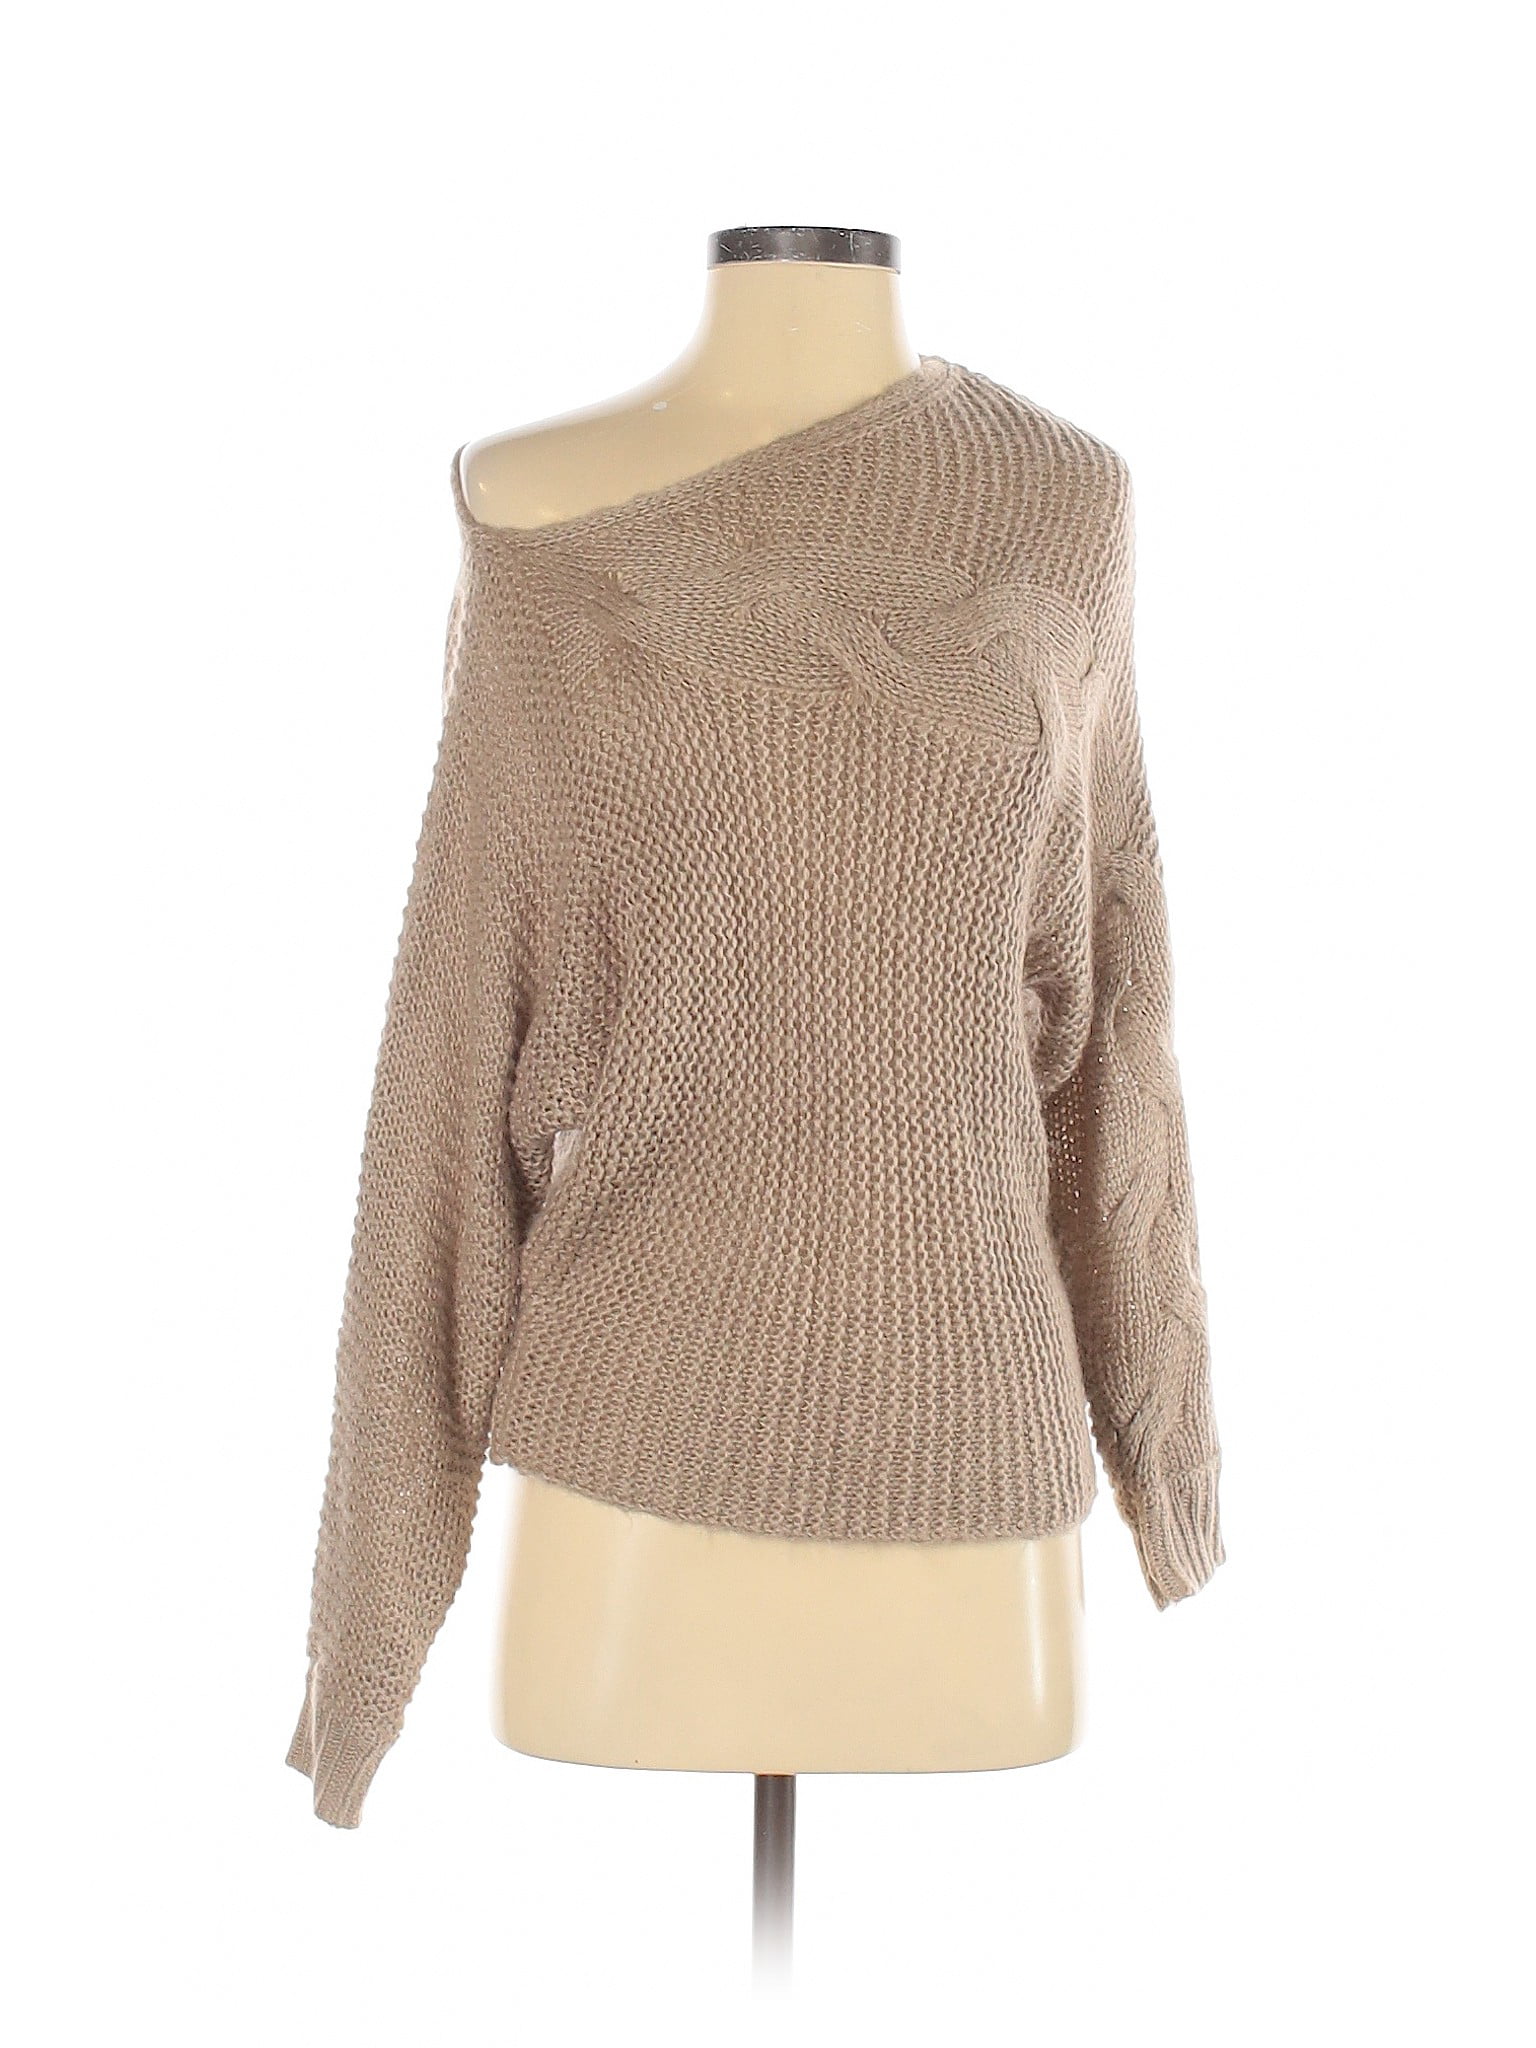 Jessica Simpson - Pre-Owned Jessica Simpson Women's Size S Pullover ...